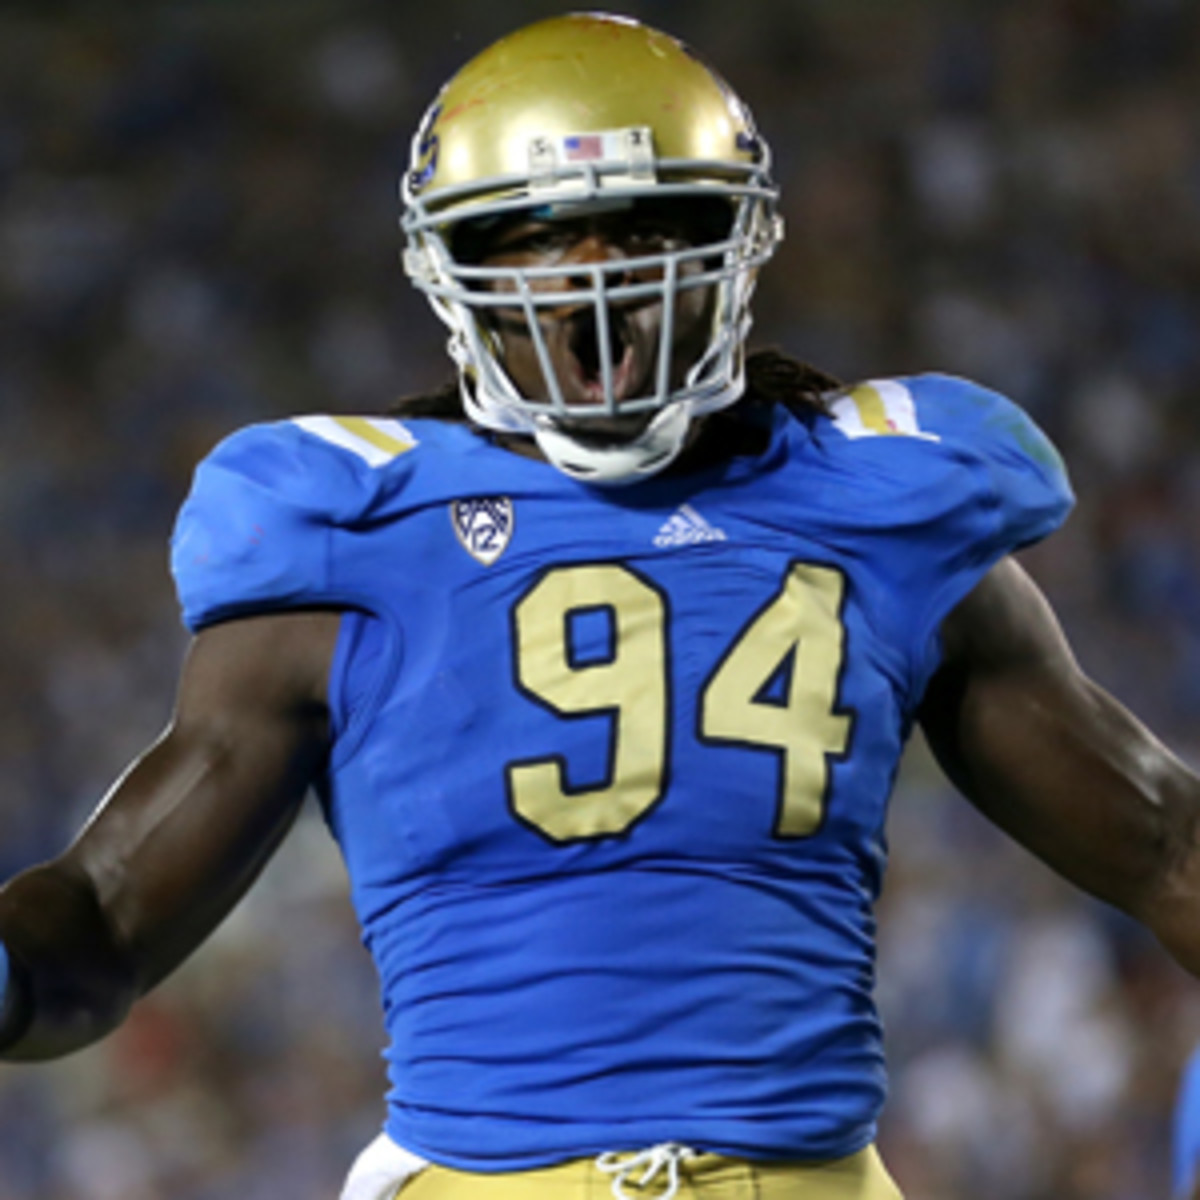 Owamagbe Odighizuwa recorded 44 tackles and 3.5 sacks during his sophomore season. (Stephen Dunn/Getty Images)